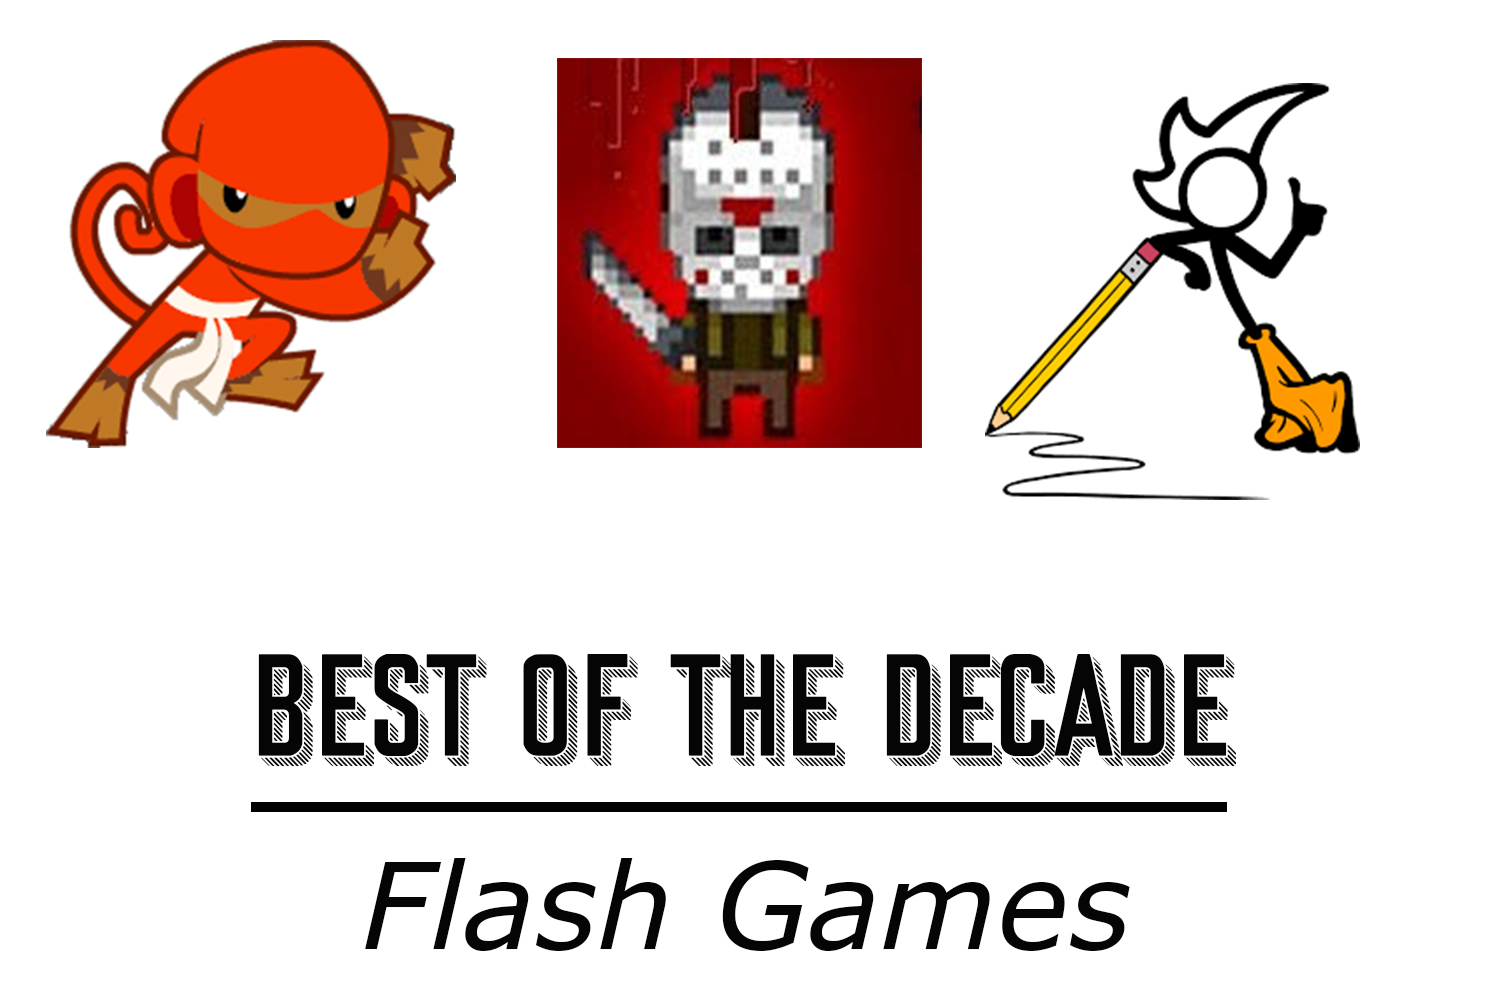 10 Flash Games We Used to Play on Our Browsers